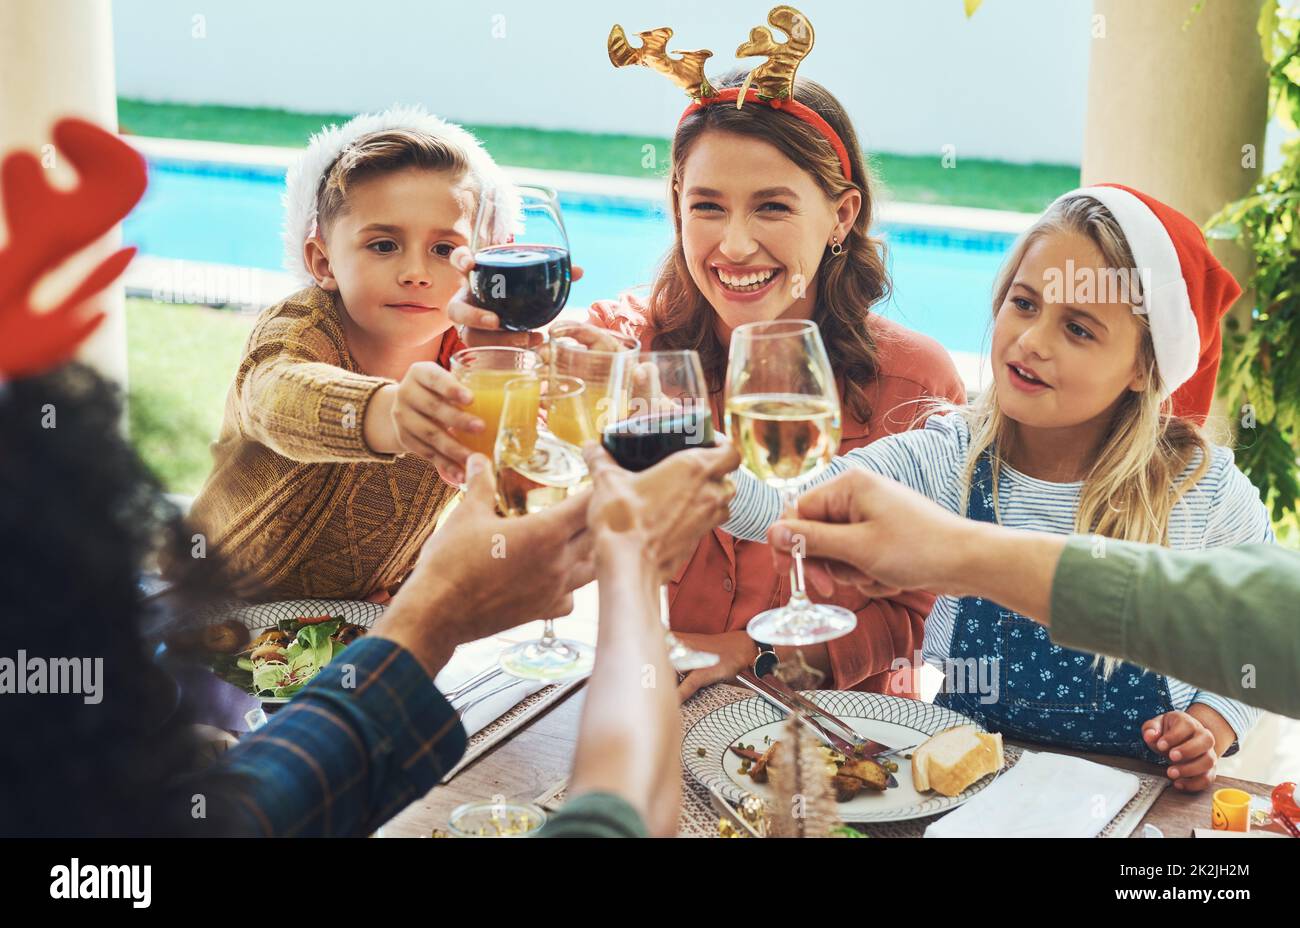 Merry Christmas everybody. Shot of a beautiful young family joining their glasses for a toast at a Christmas lunch party. Stock Photo